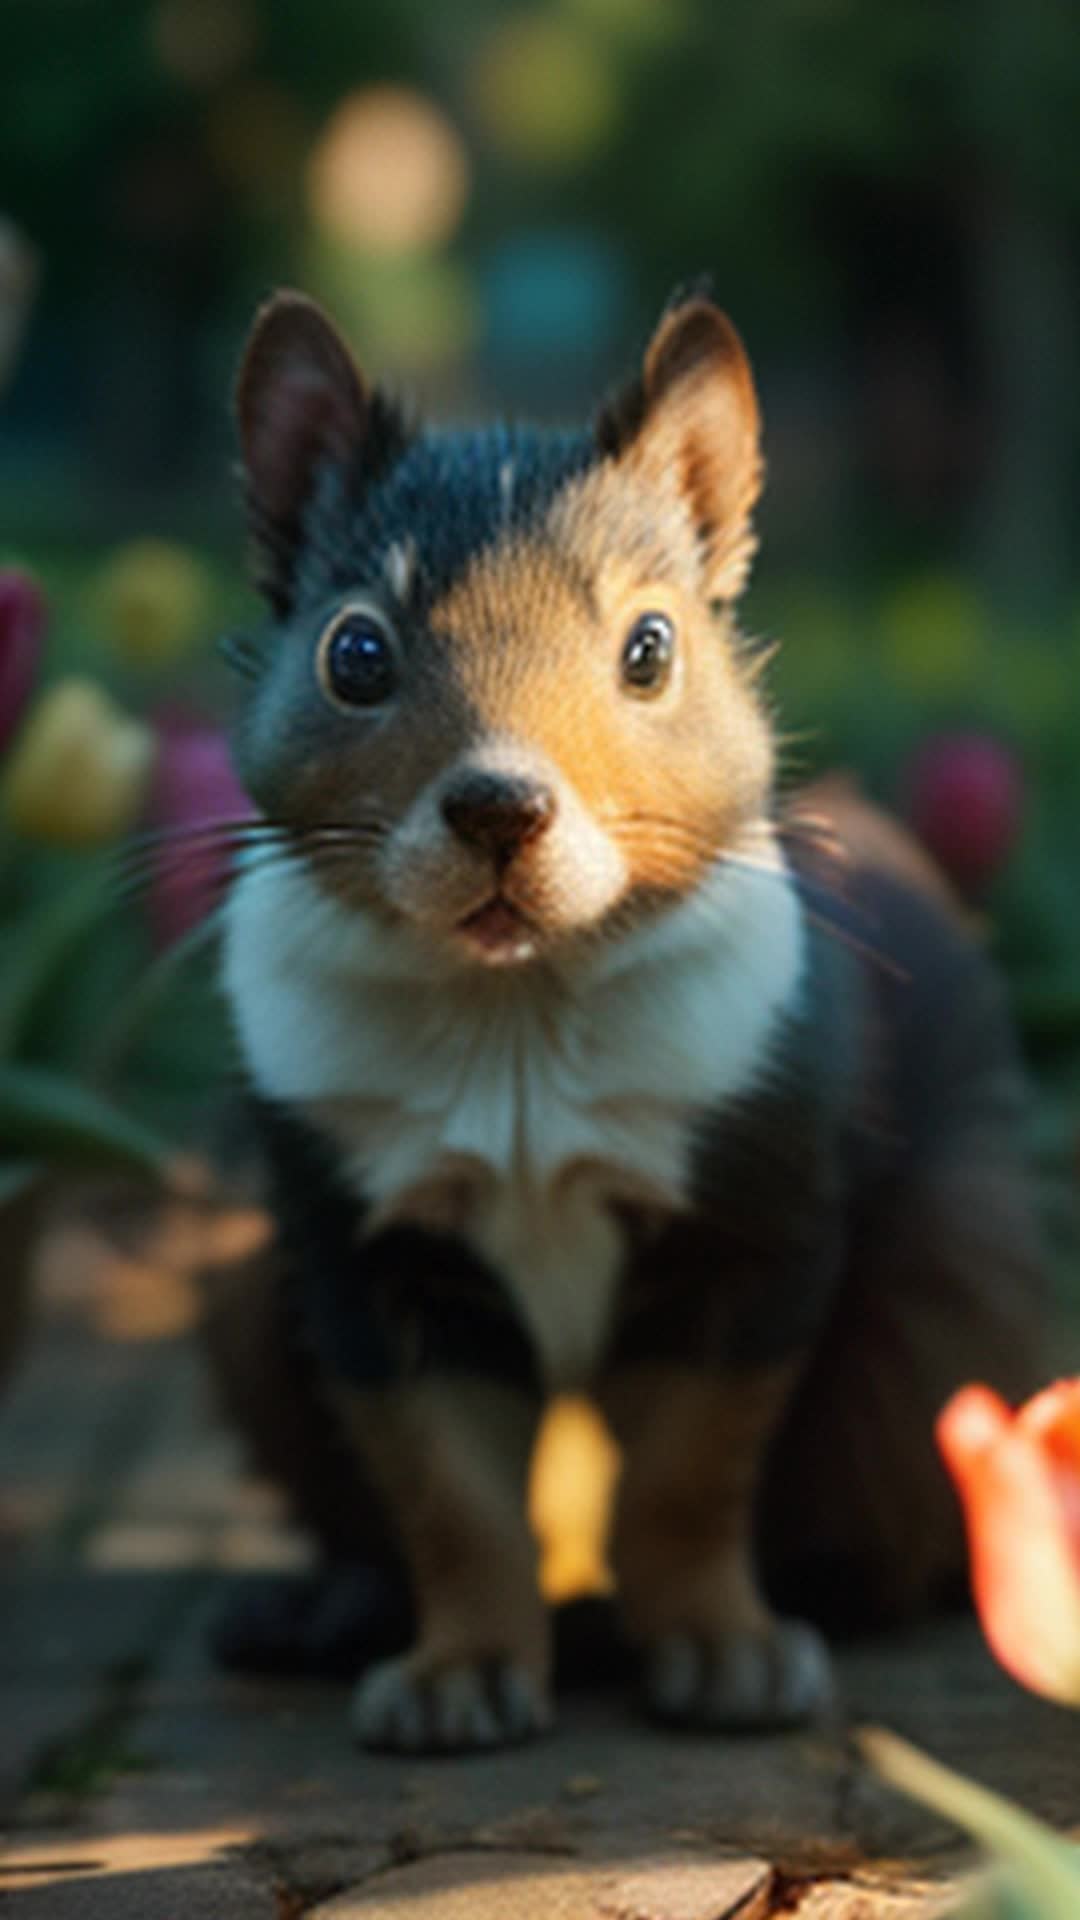 Mischievous puppy, vibrant tulip fields, Netherlands, dew-kissed petals, small paws, butterflies stirred, playful darting, curious squirrel joining, frolic action, rainbow tulips, friendly hedgehog, playfully nudging, new friendship, floral paradise, highly detailed, sharp focus, soft shadows